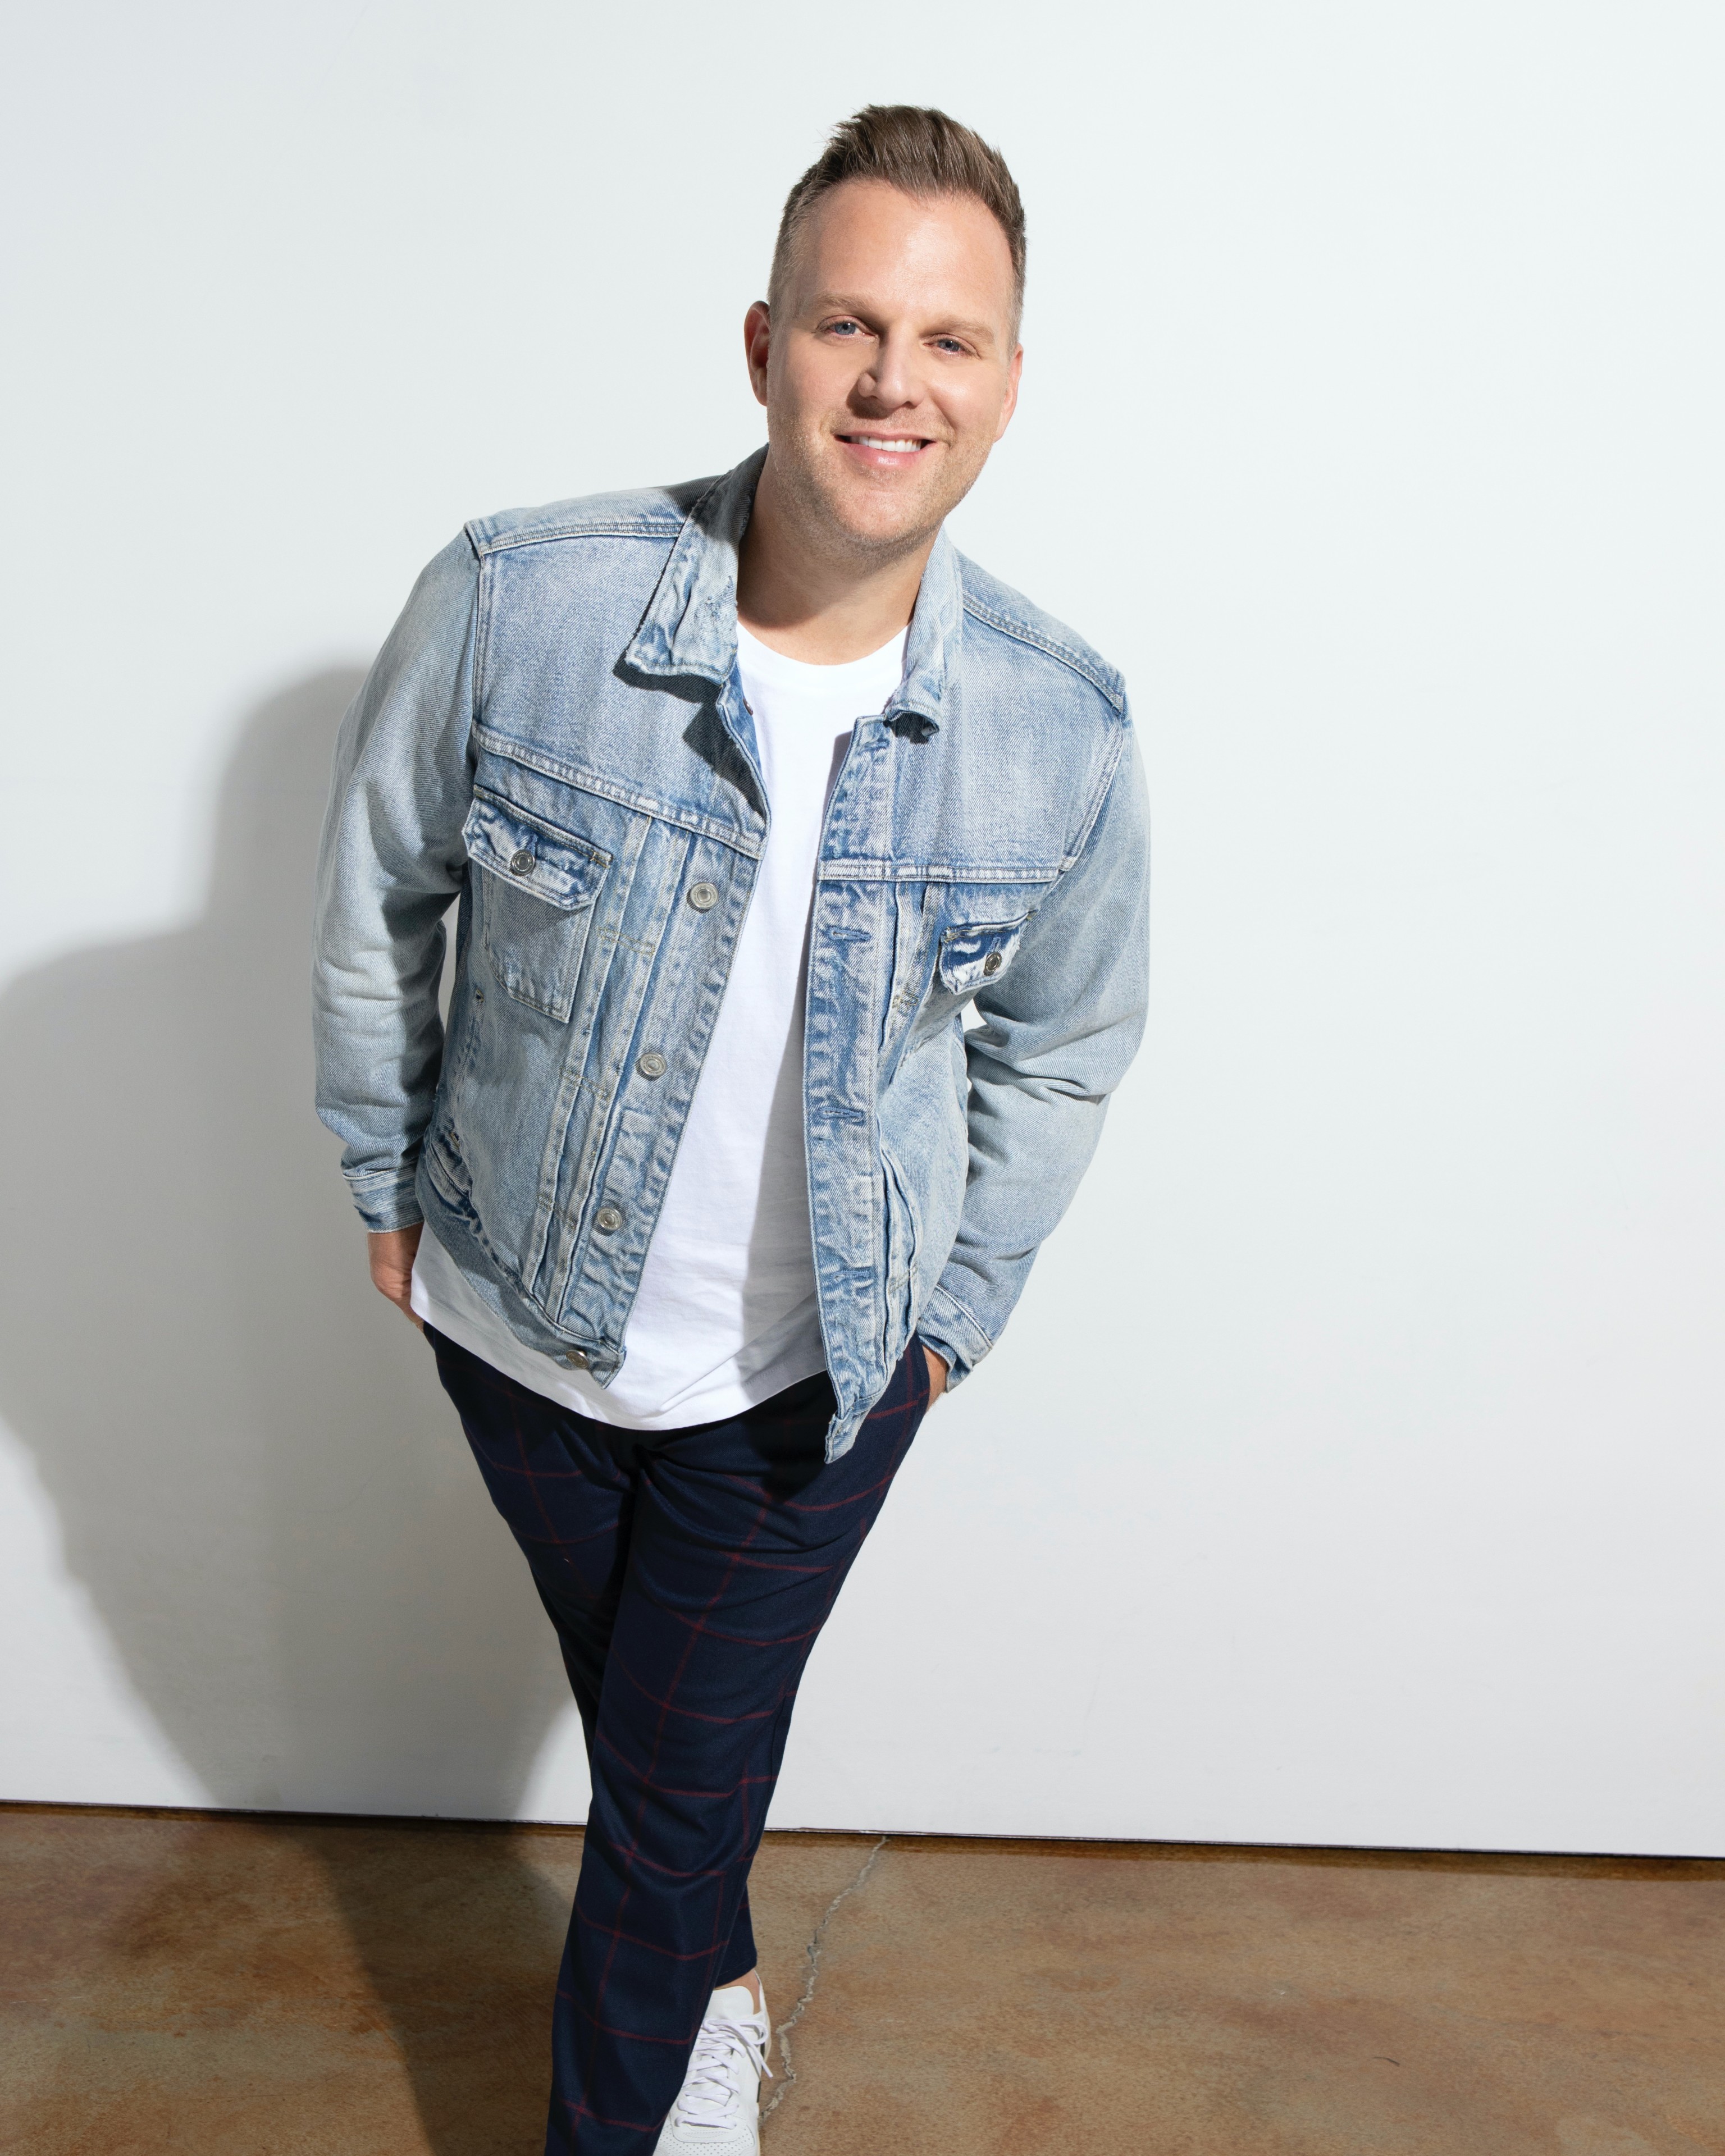 ASCAP Christian Music Awards Recognize Matthew West As Songwriter Of The Year For Third Time